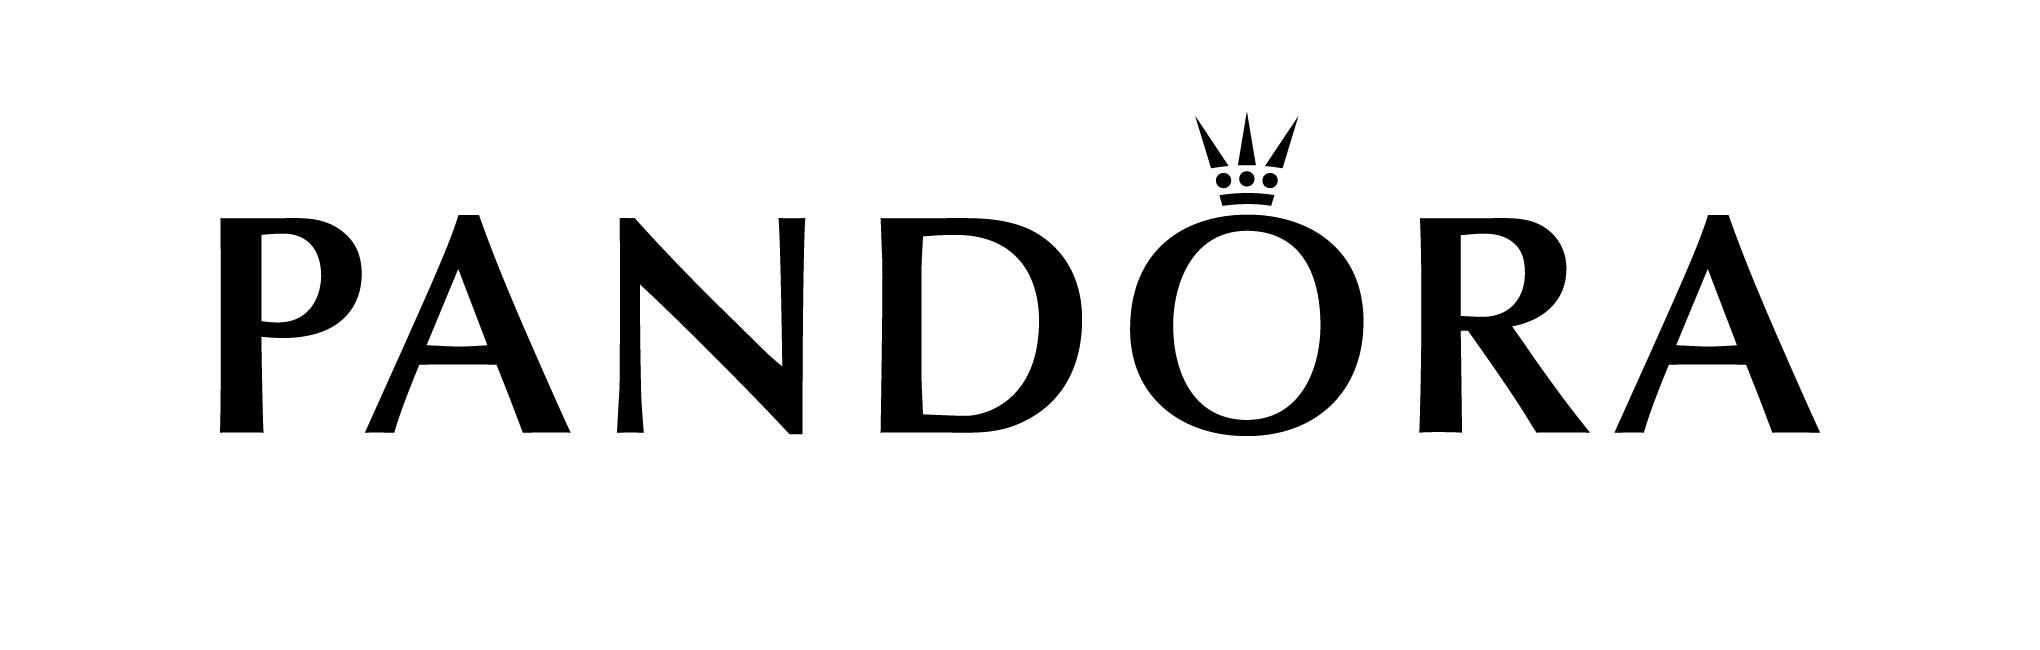 Famous Jewelry Store Logo - Pandora Logo, symbol, meaning, History and Evolution